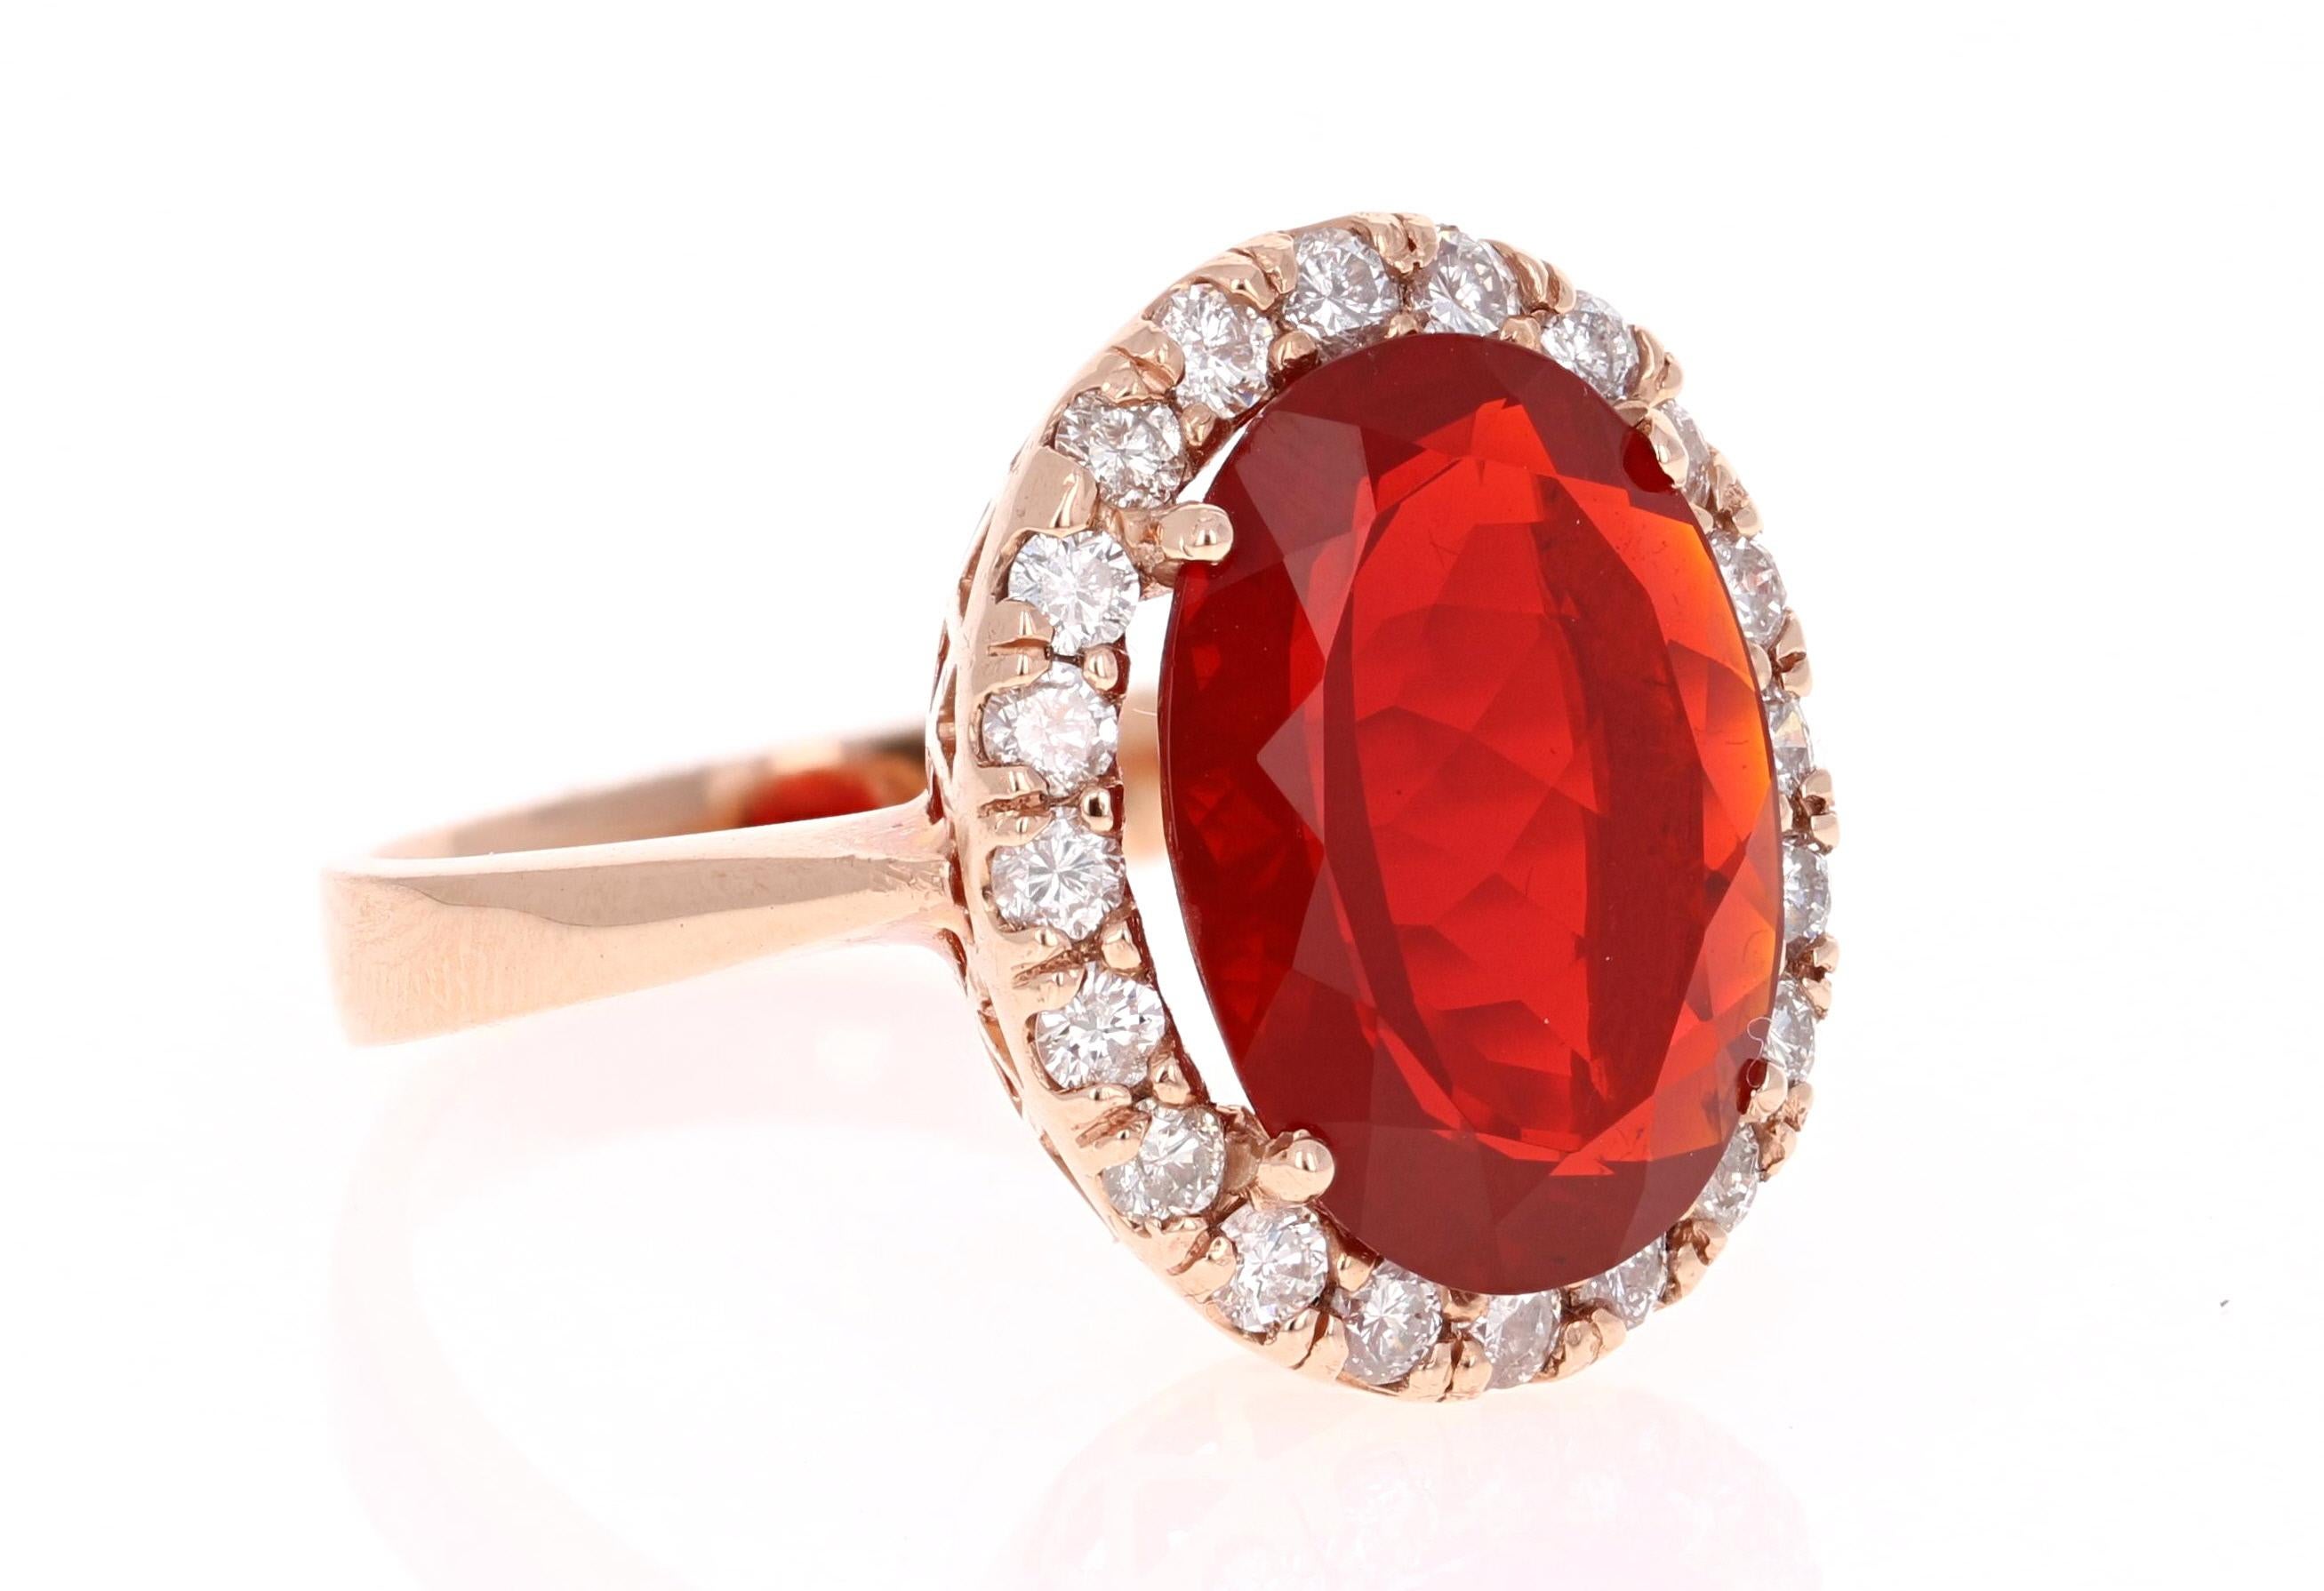 Beautiful Red Fire Opal and Diamond Ring. This ring has a 4.73 carat Fire Opal in the center of the ring and is surrounded by a halo of 21 Round Cut Diamonds that weigh a total of 0.81 carat.  The total carat weight of the ring is 5.54 carats. 